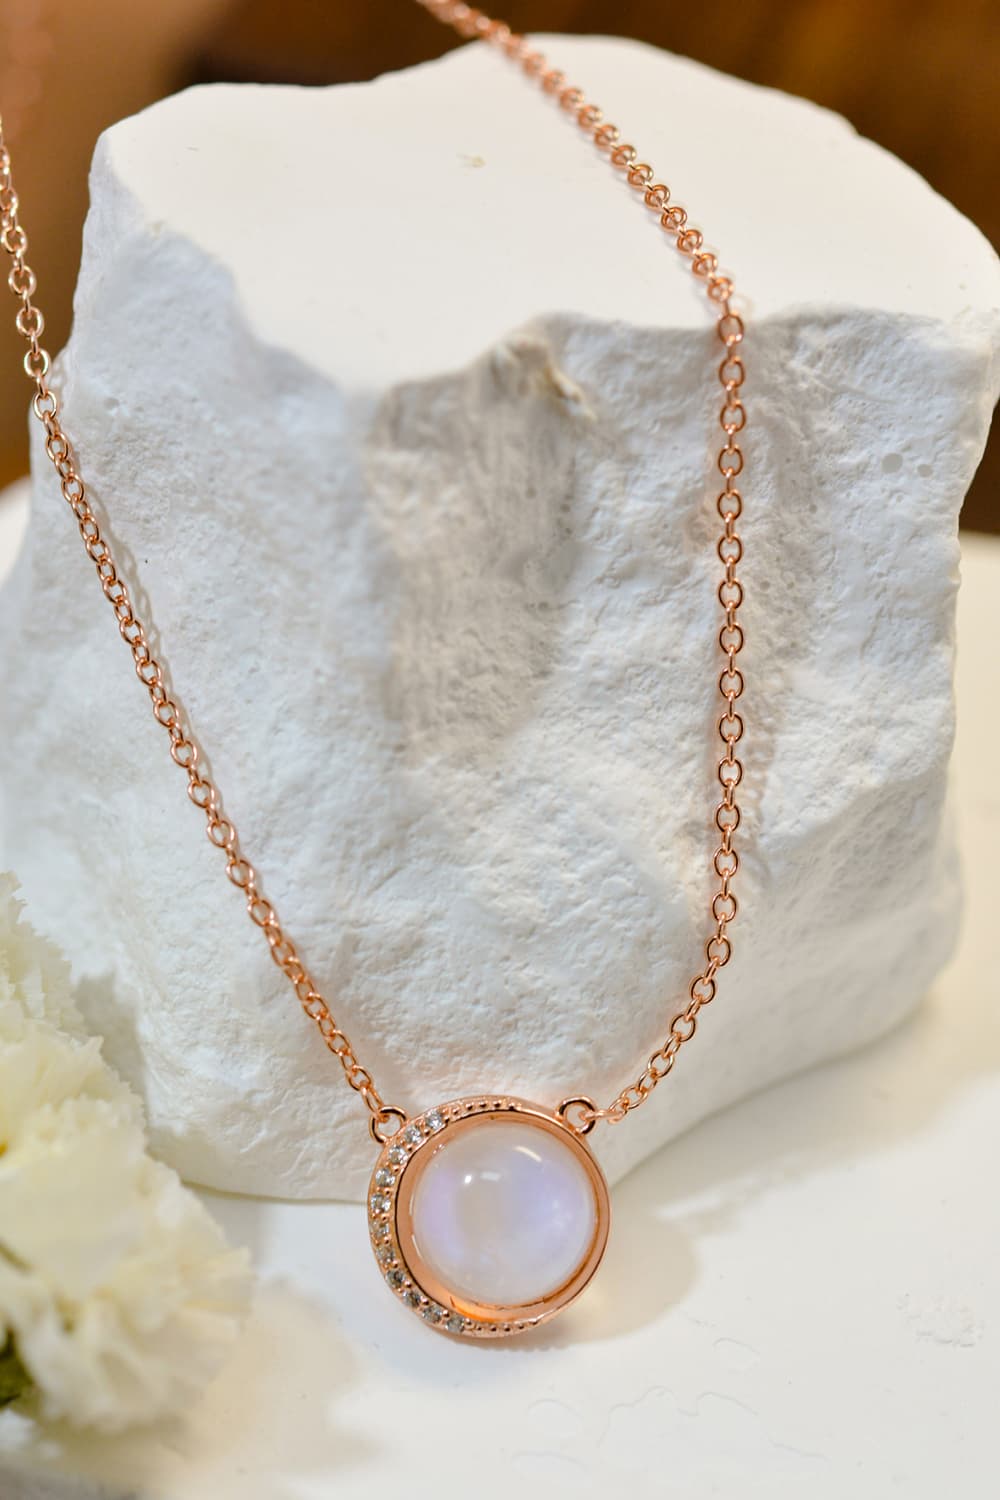 Yotreasure | Moonstone Necklace 925 Sterling Silver Gold Plated Chain Pendant Necklace Jewelry